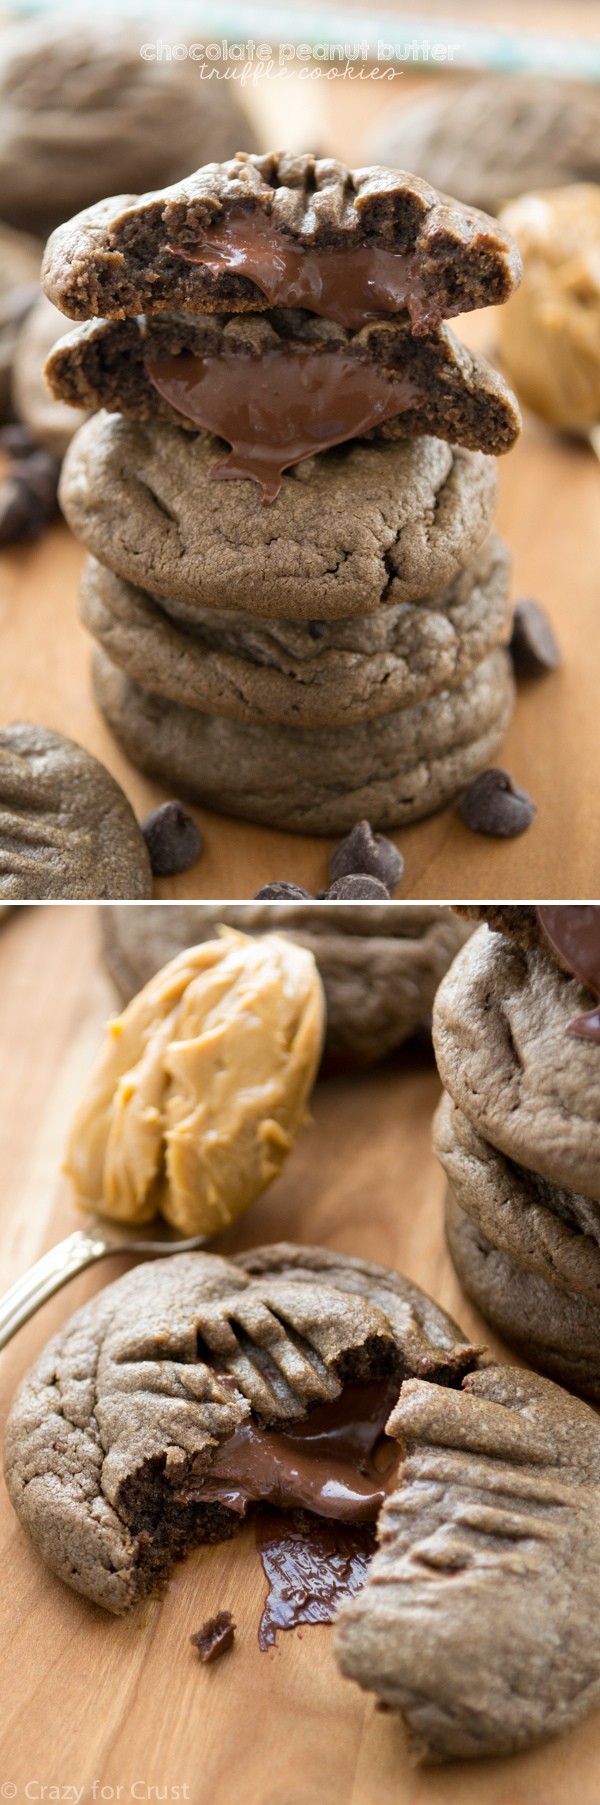 Chocolate Peanut Butter Truffle Cookies - Crazy for Crust